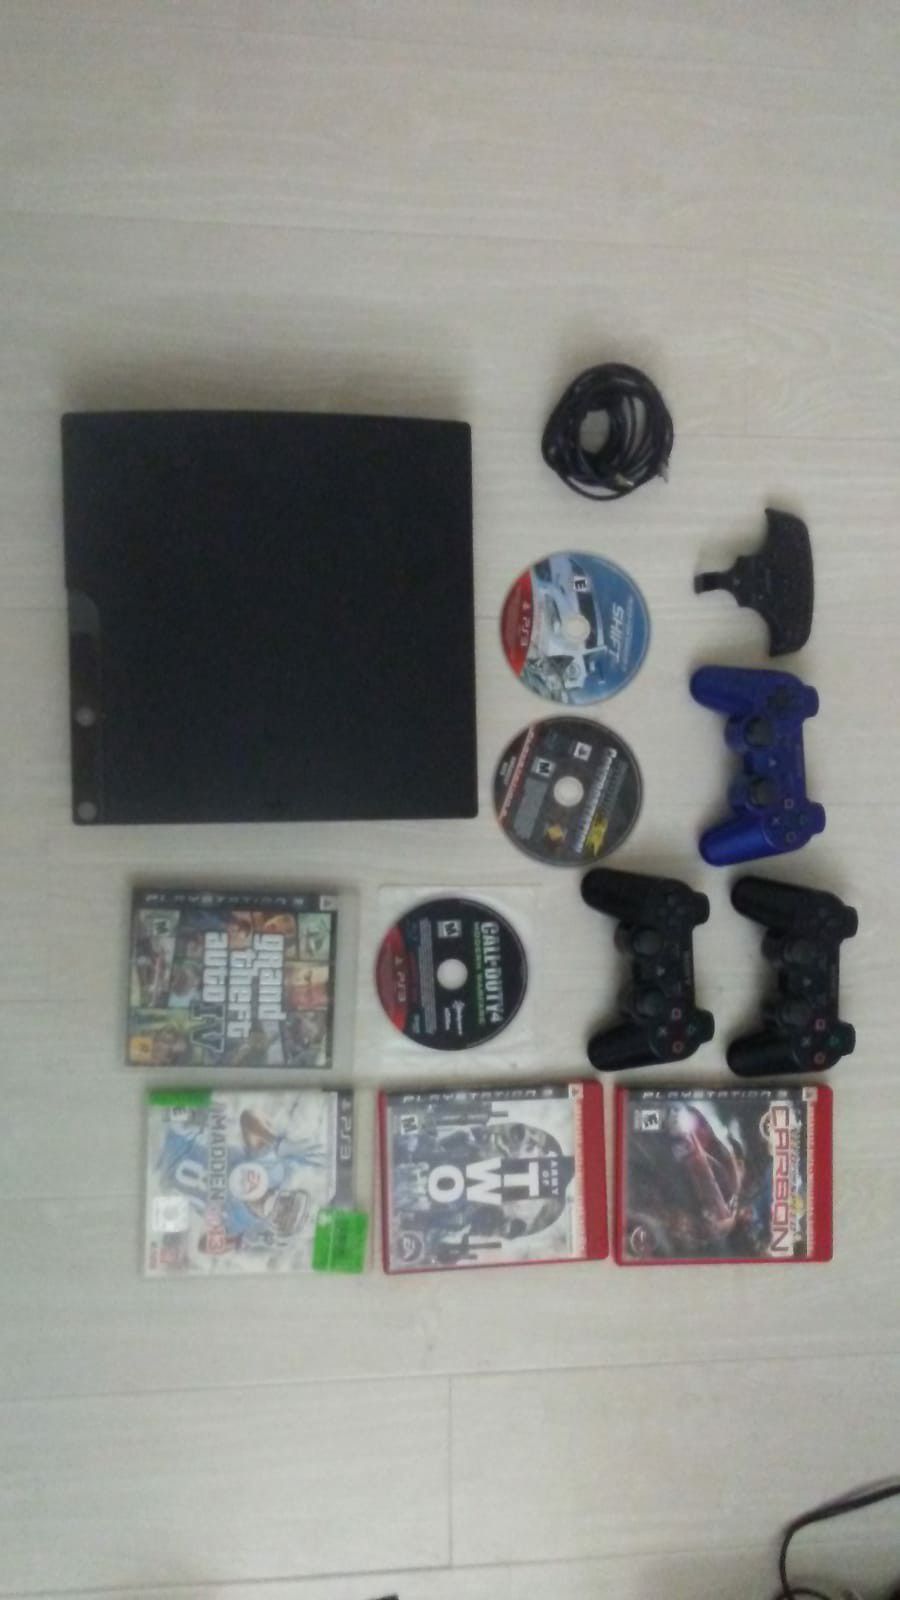 PS3 with 3 controllers and games